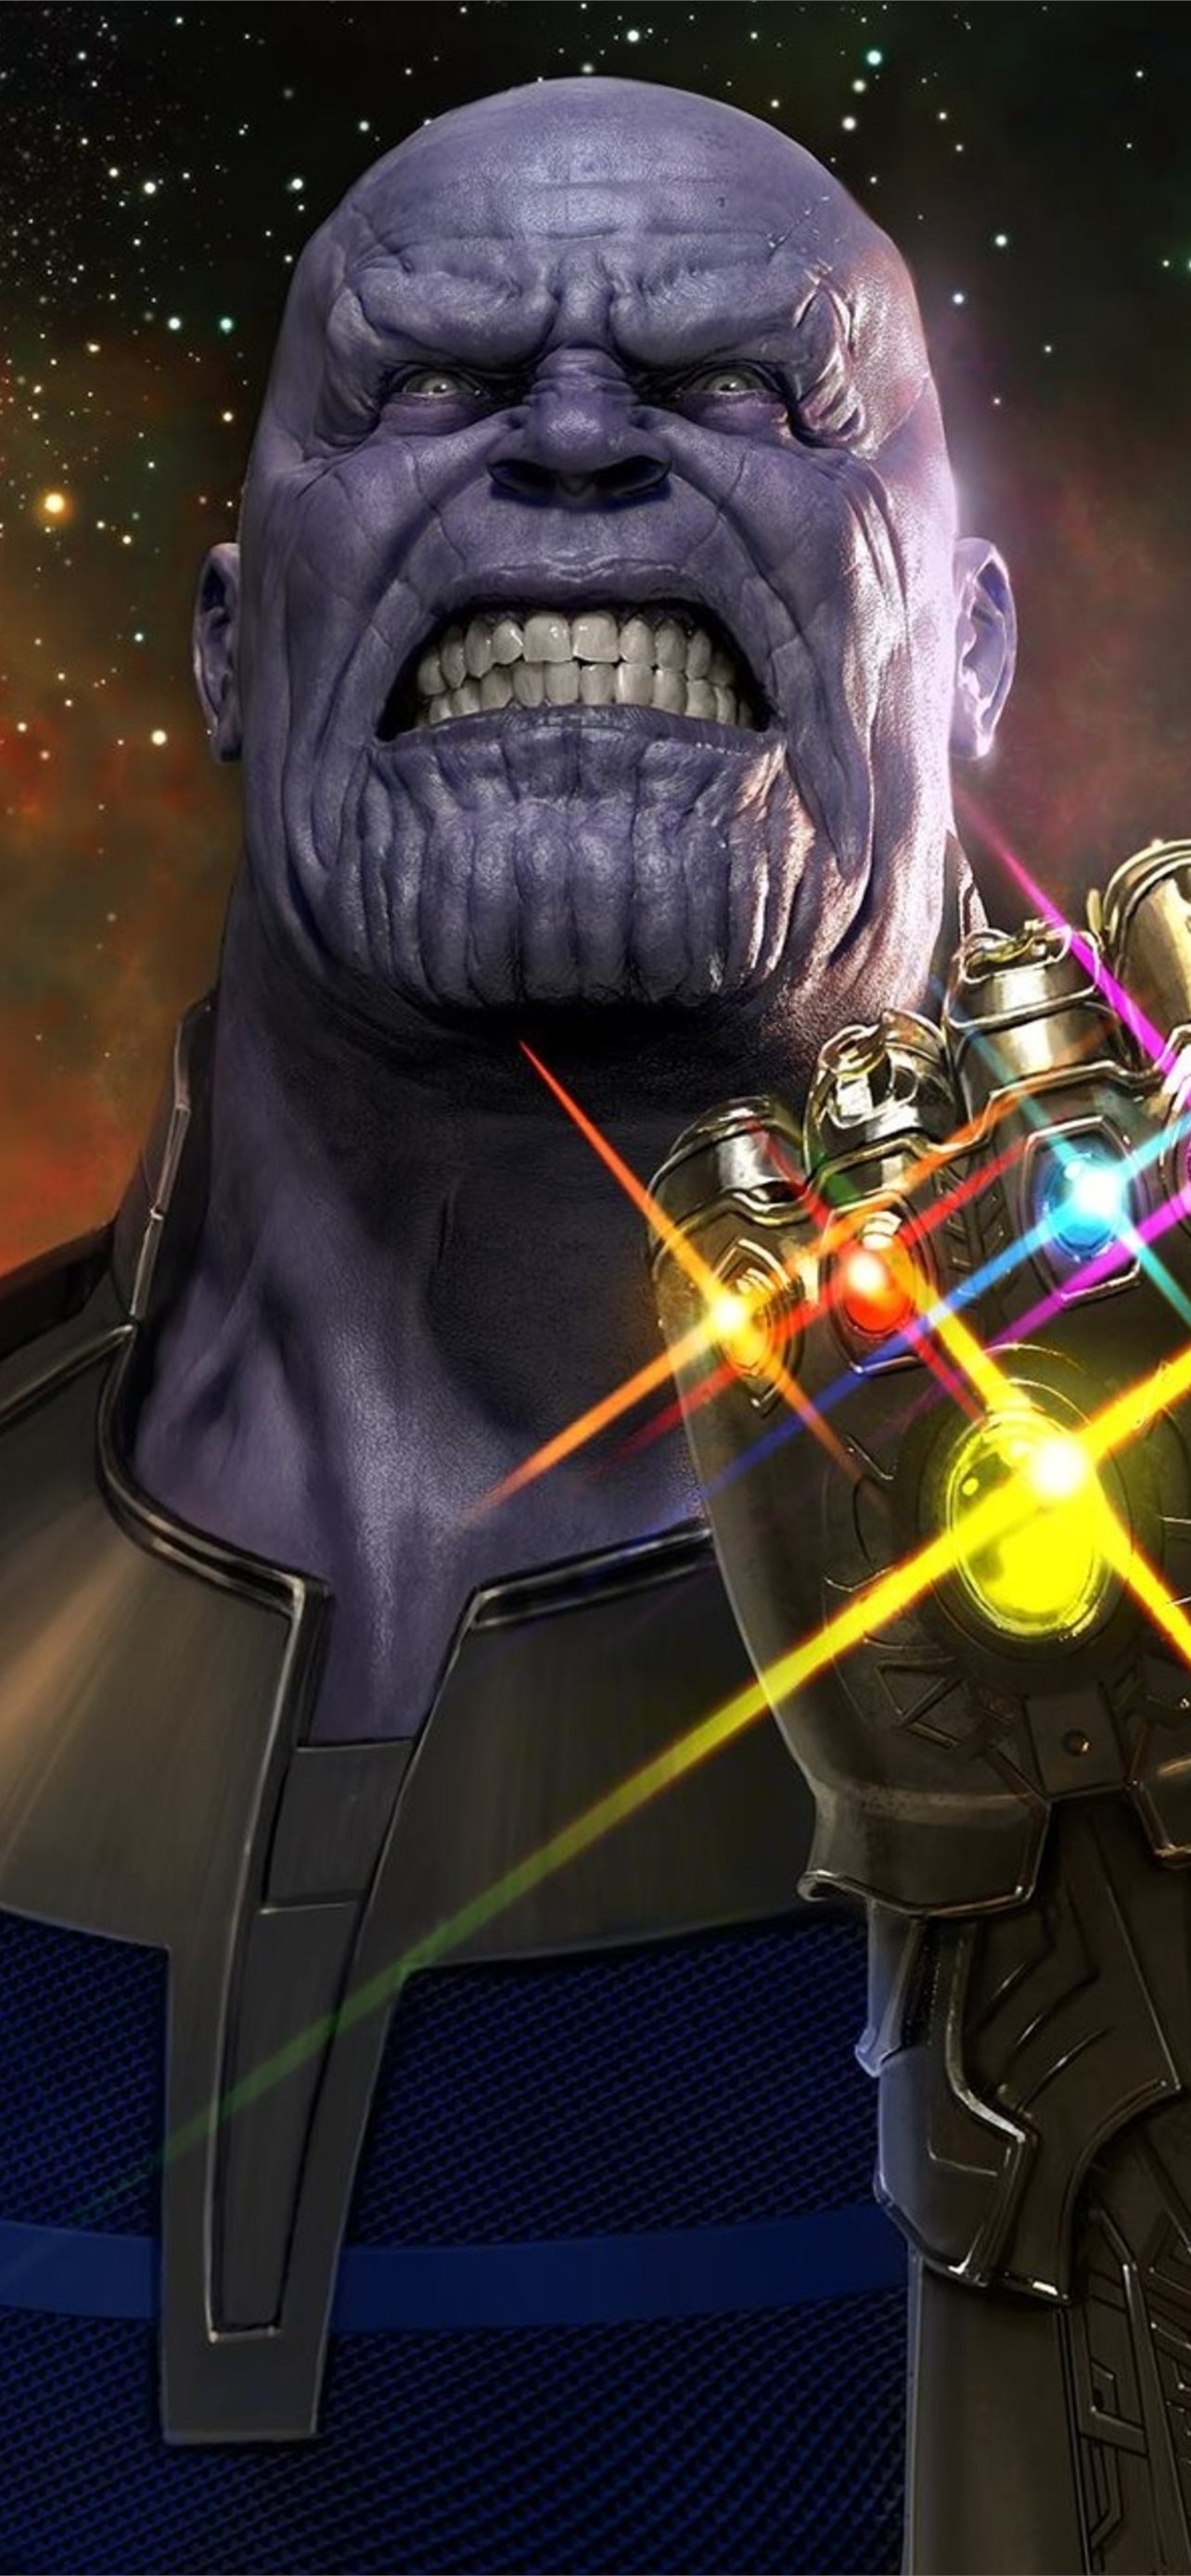 Thanos Avengers Infinity War Samsung Galaxy Note 9... iPhone Wallpapers  Free Download